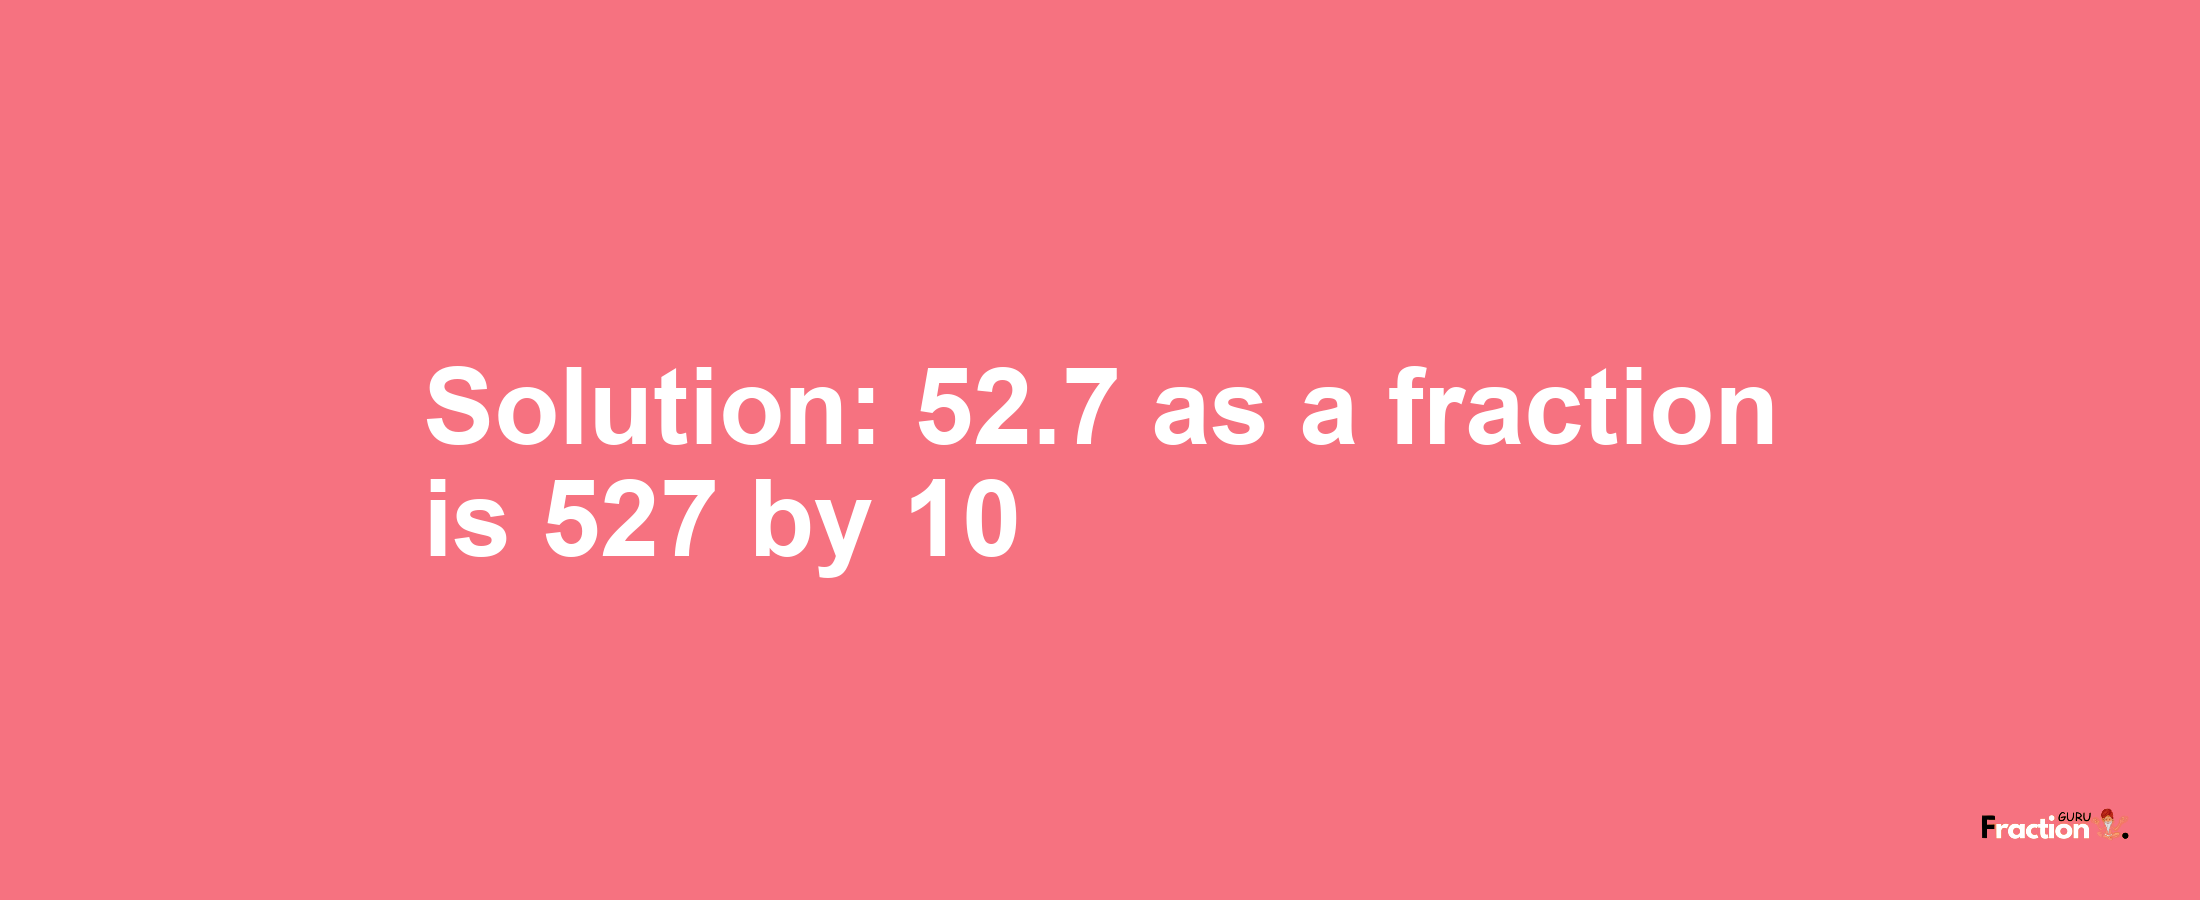 Solution:52.7 as a fraction is 527/10